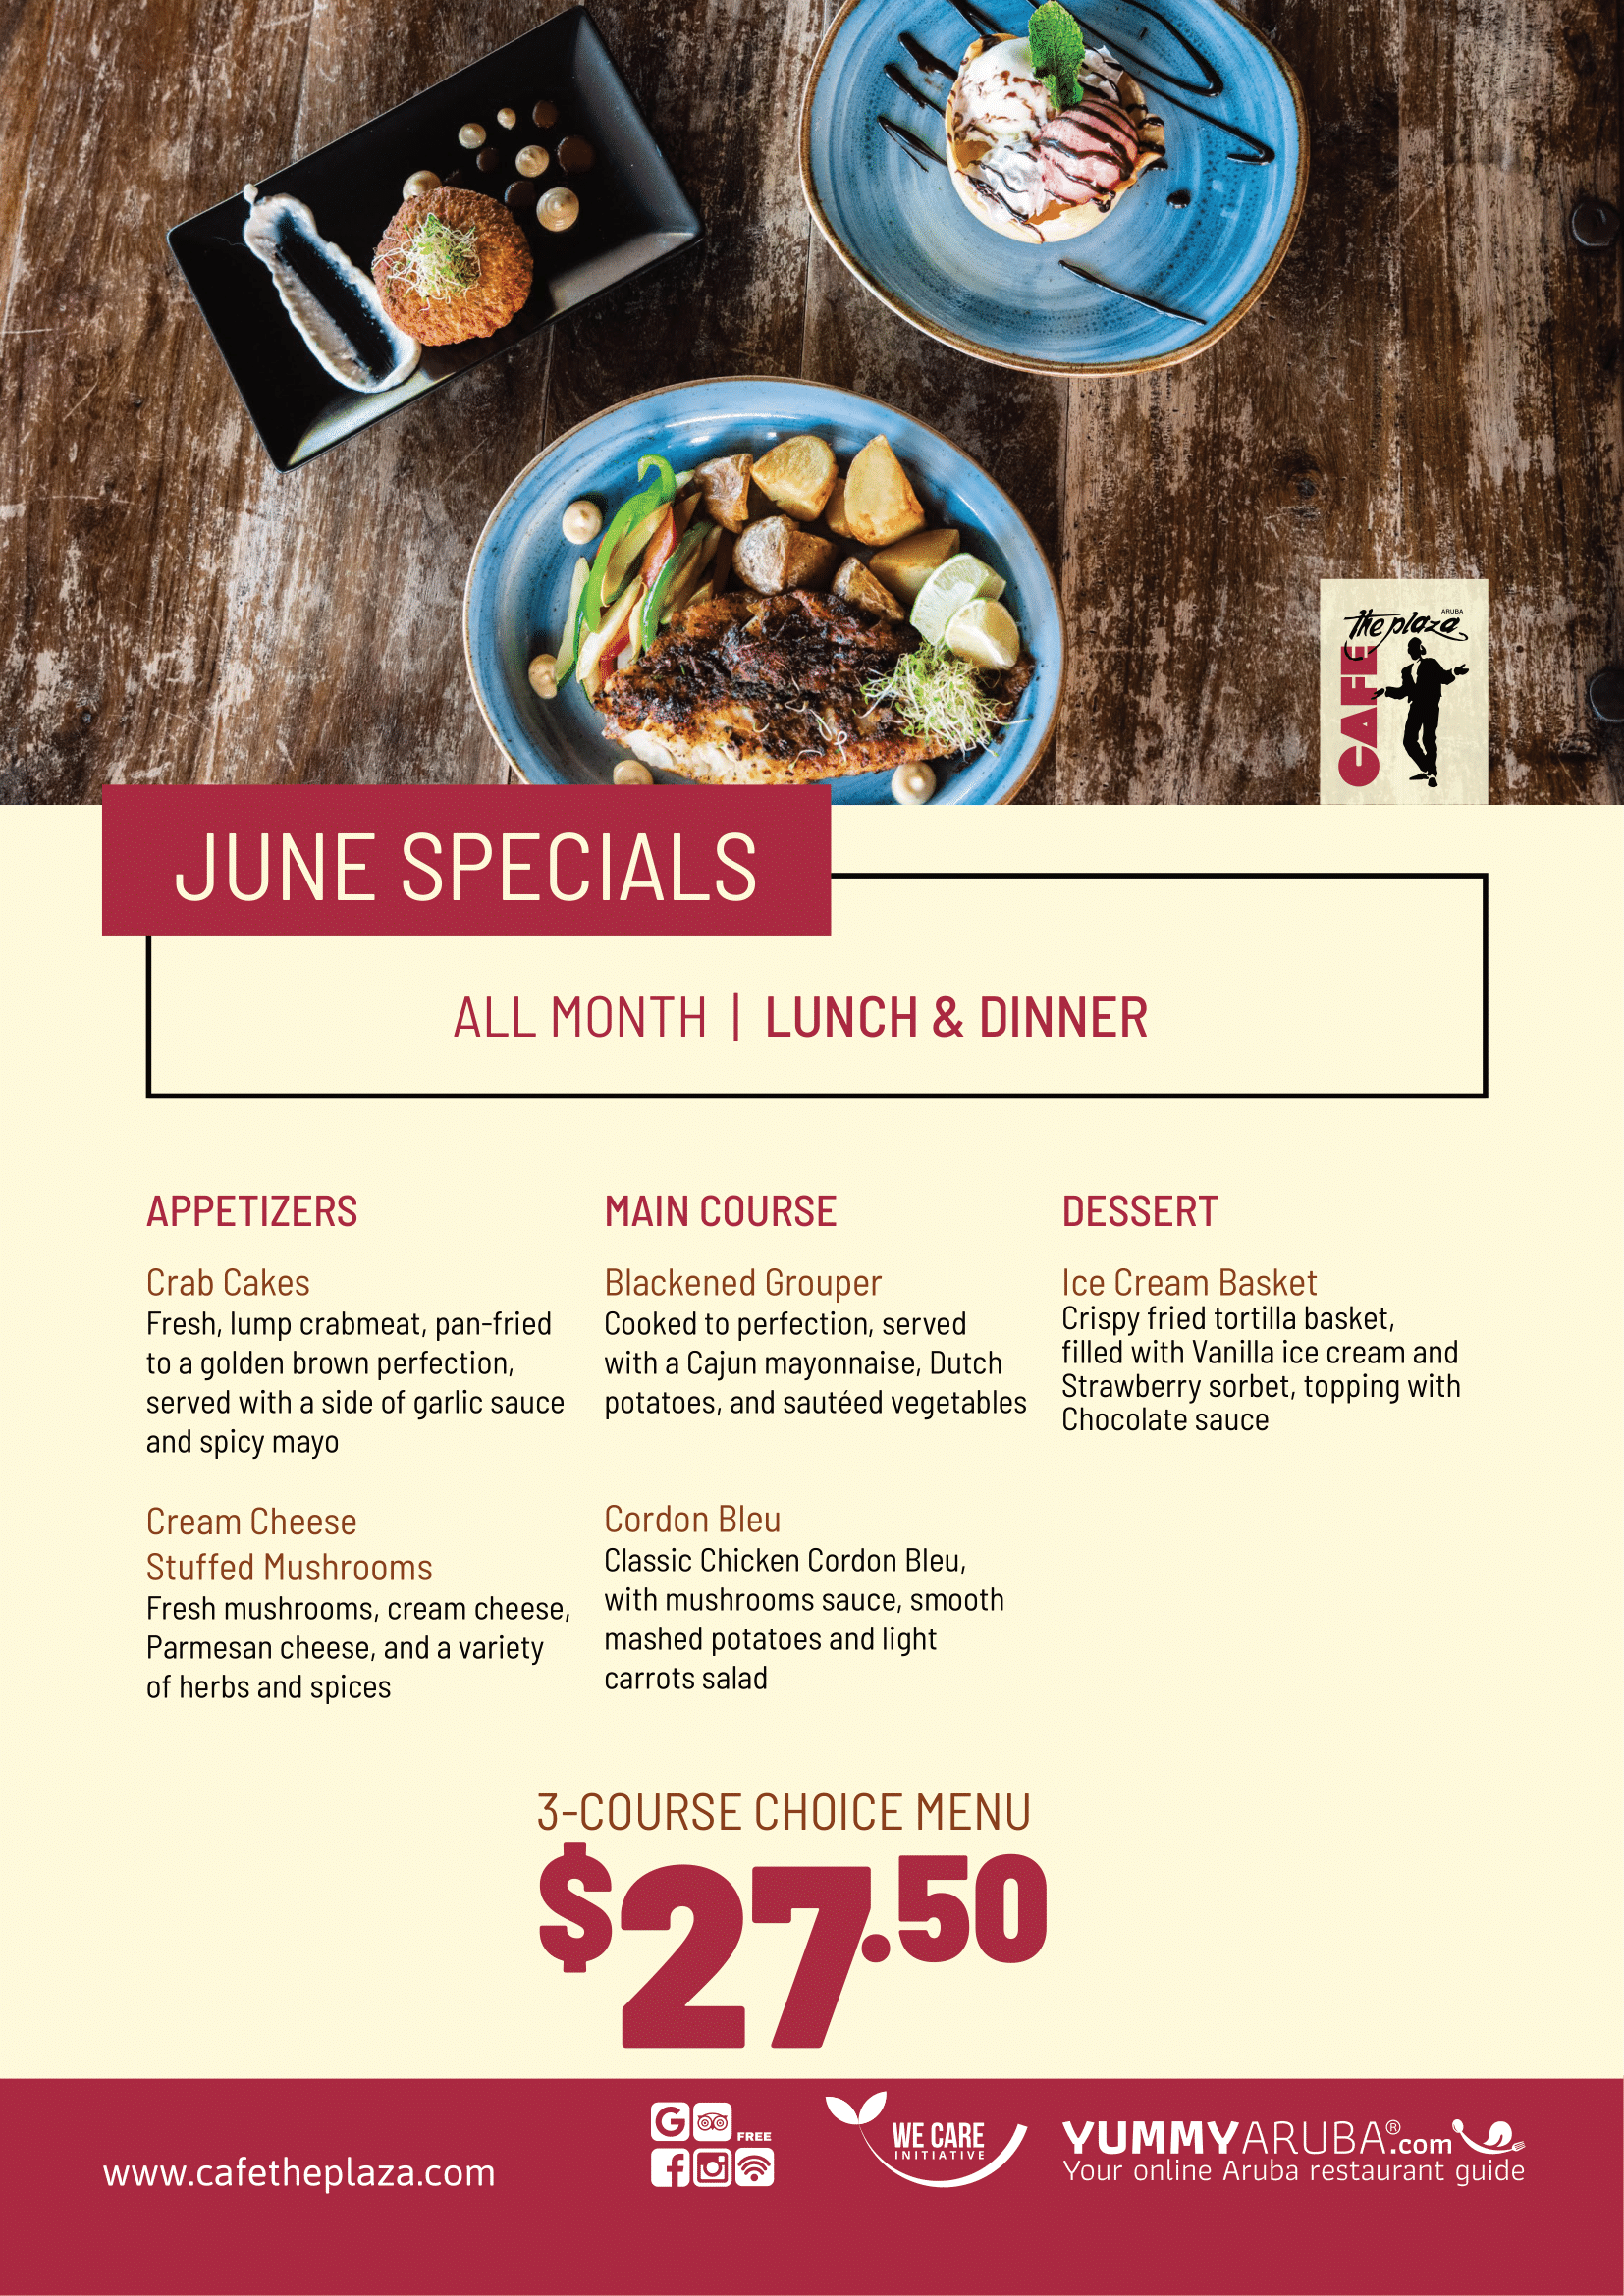 Affordable dining specials